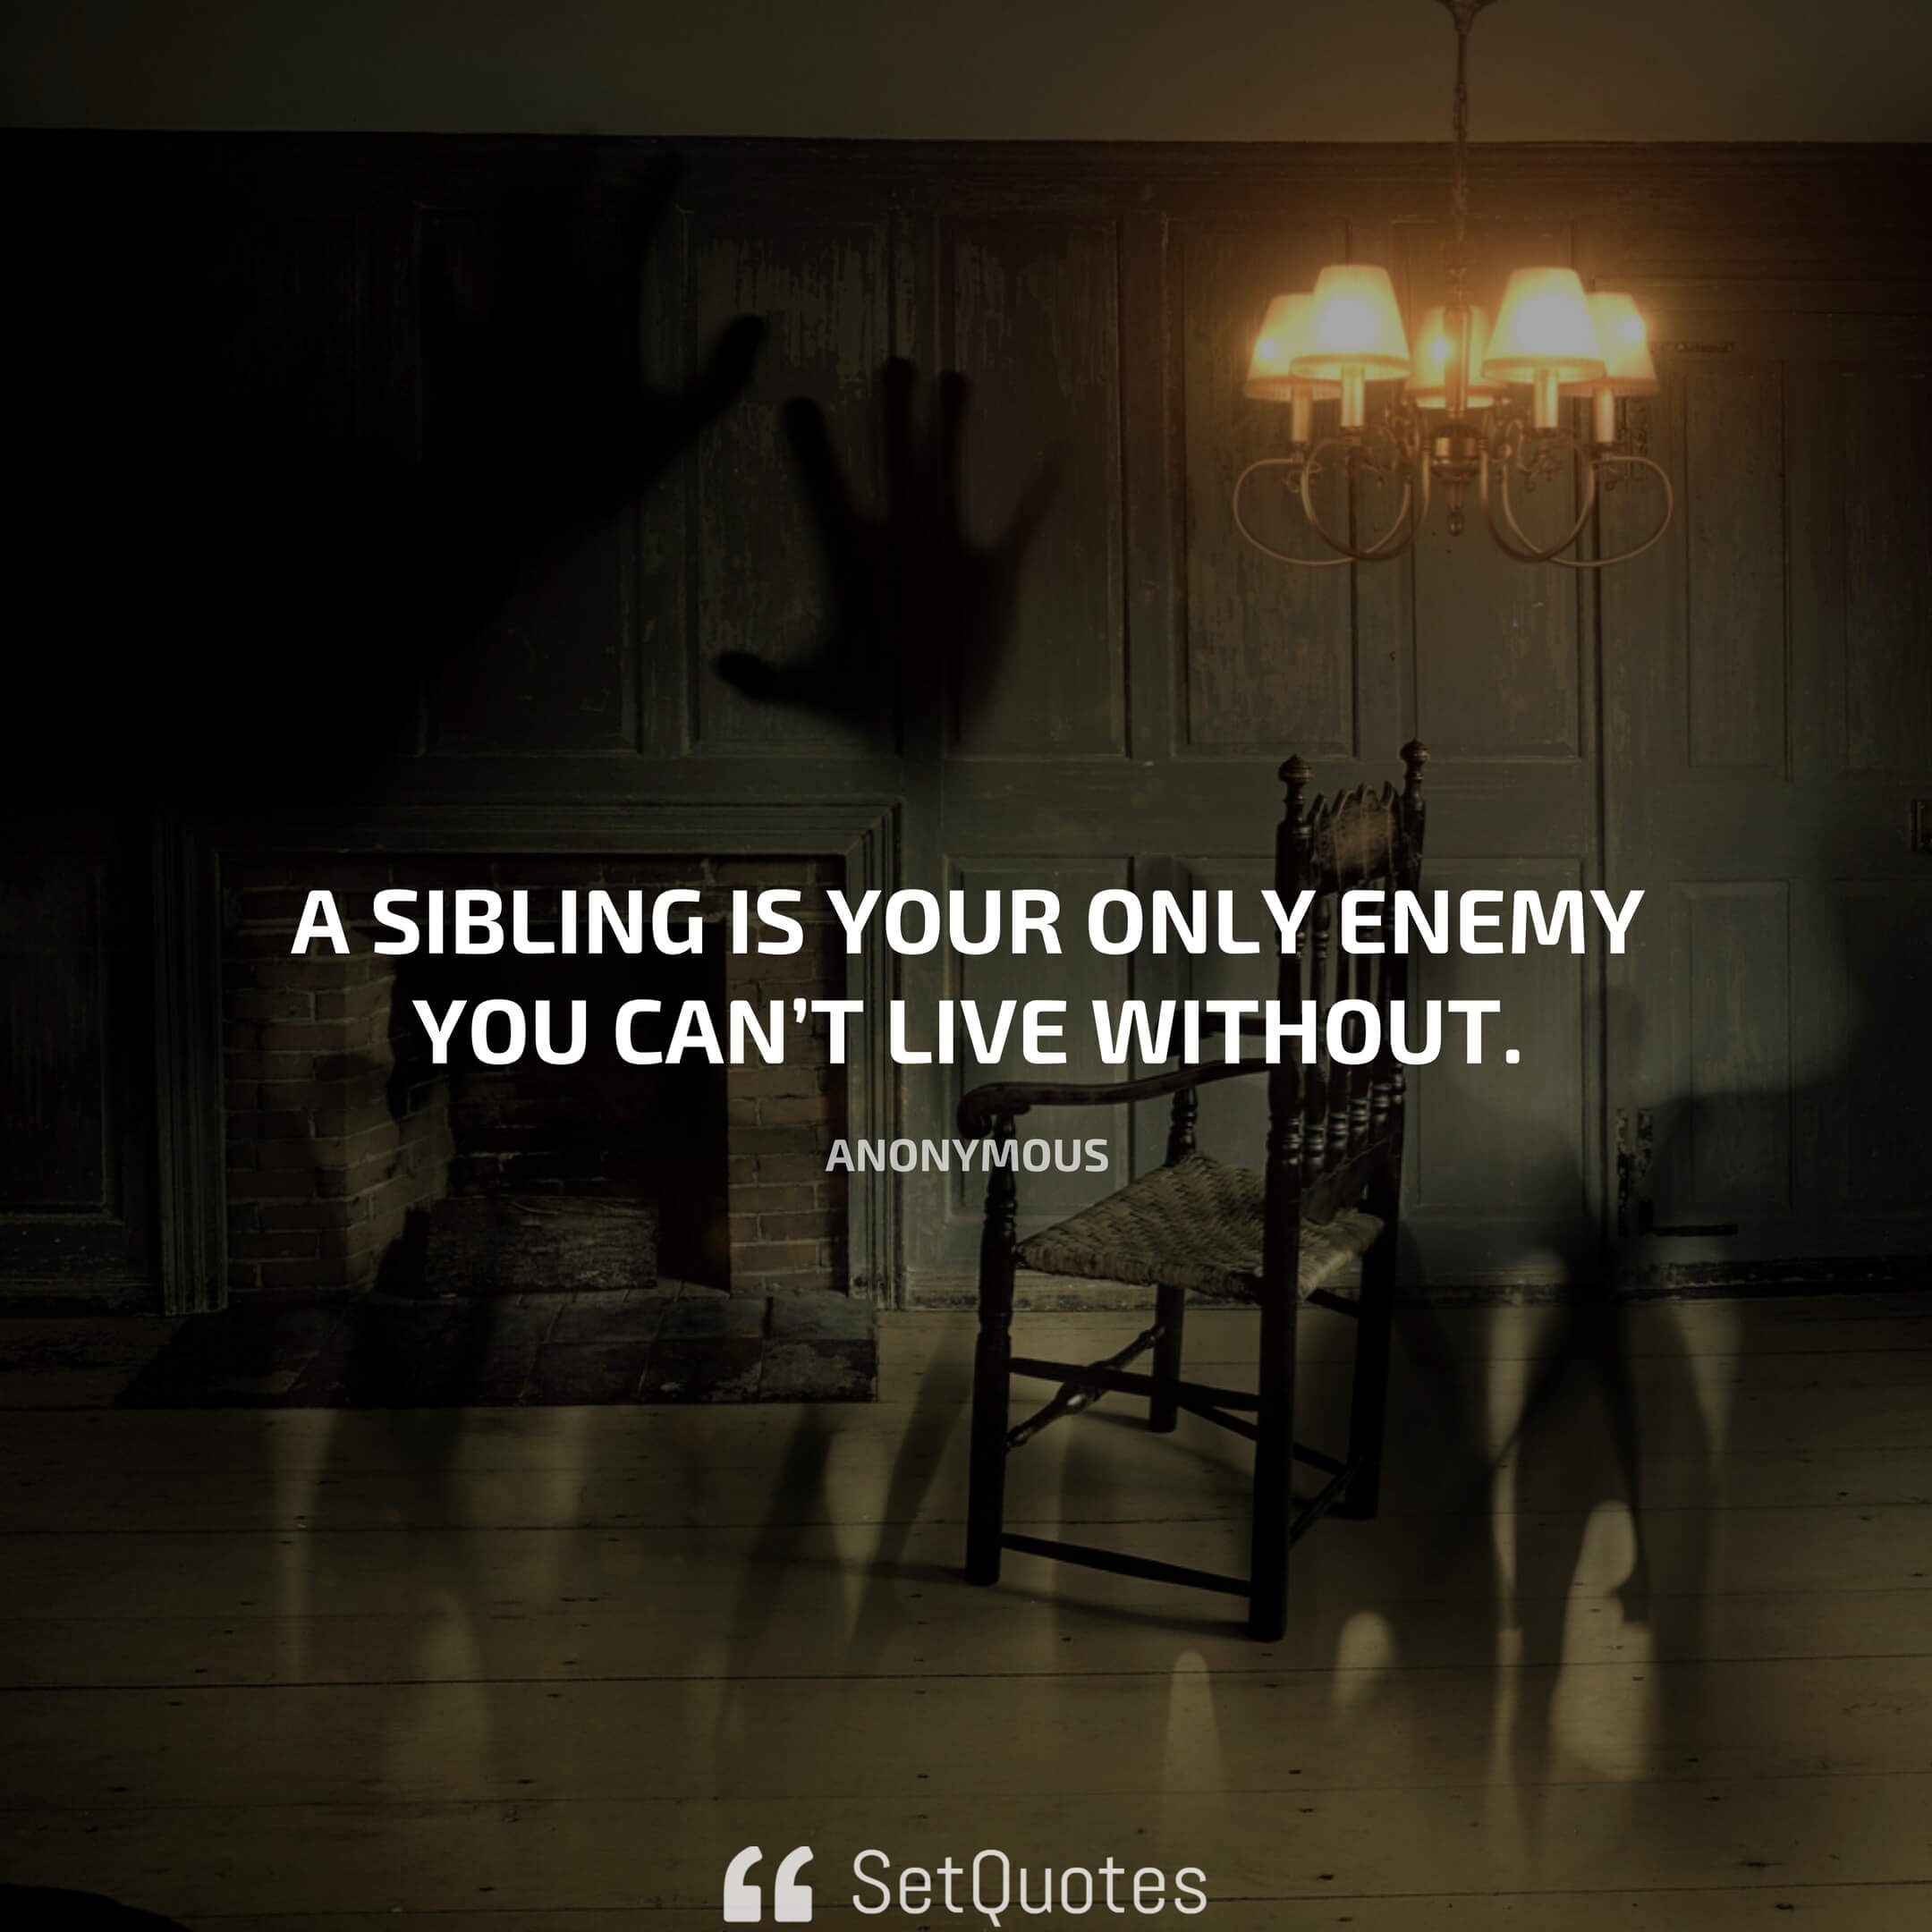 “A sibling is your only enemy you can’t live without.”